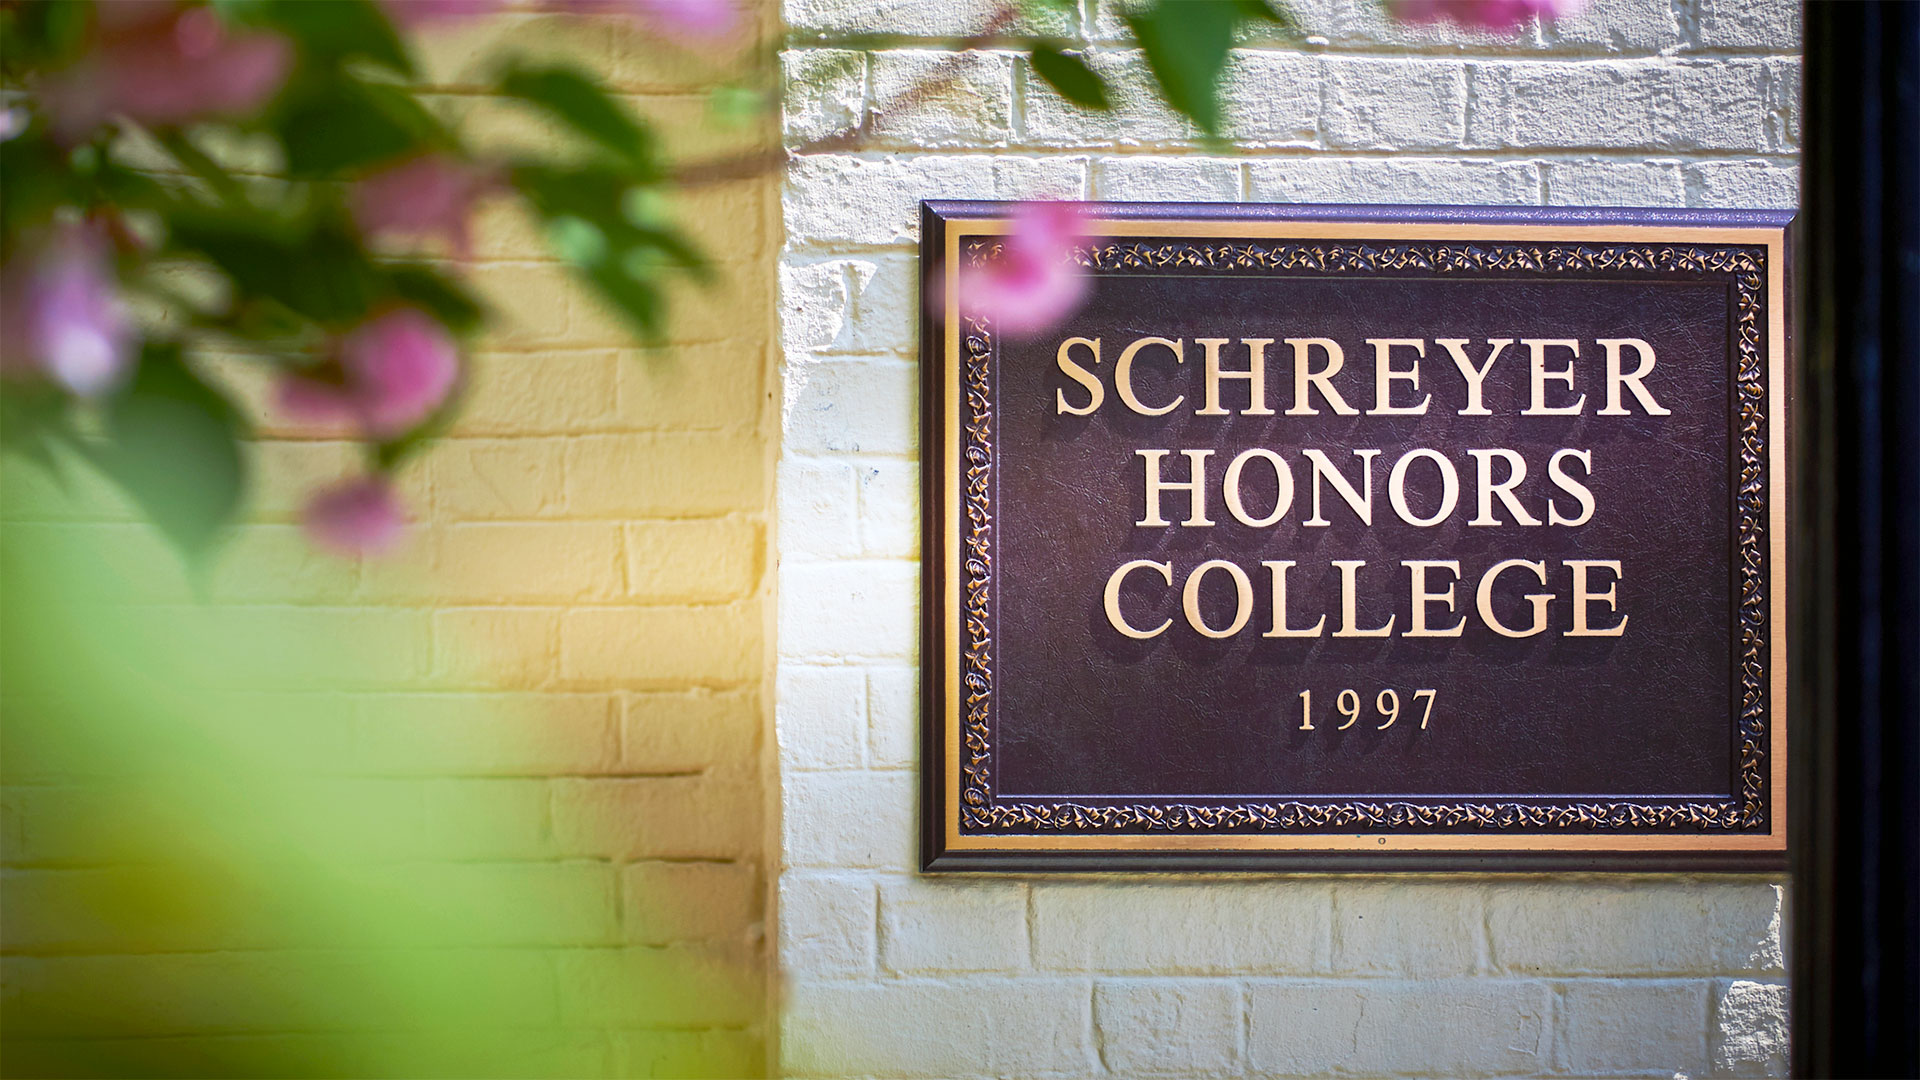 Schreyer Honors College sign